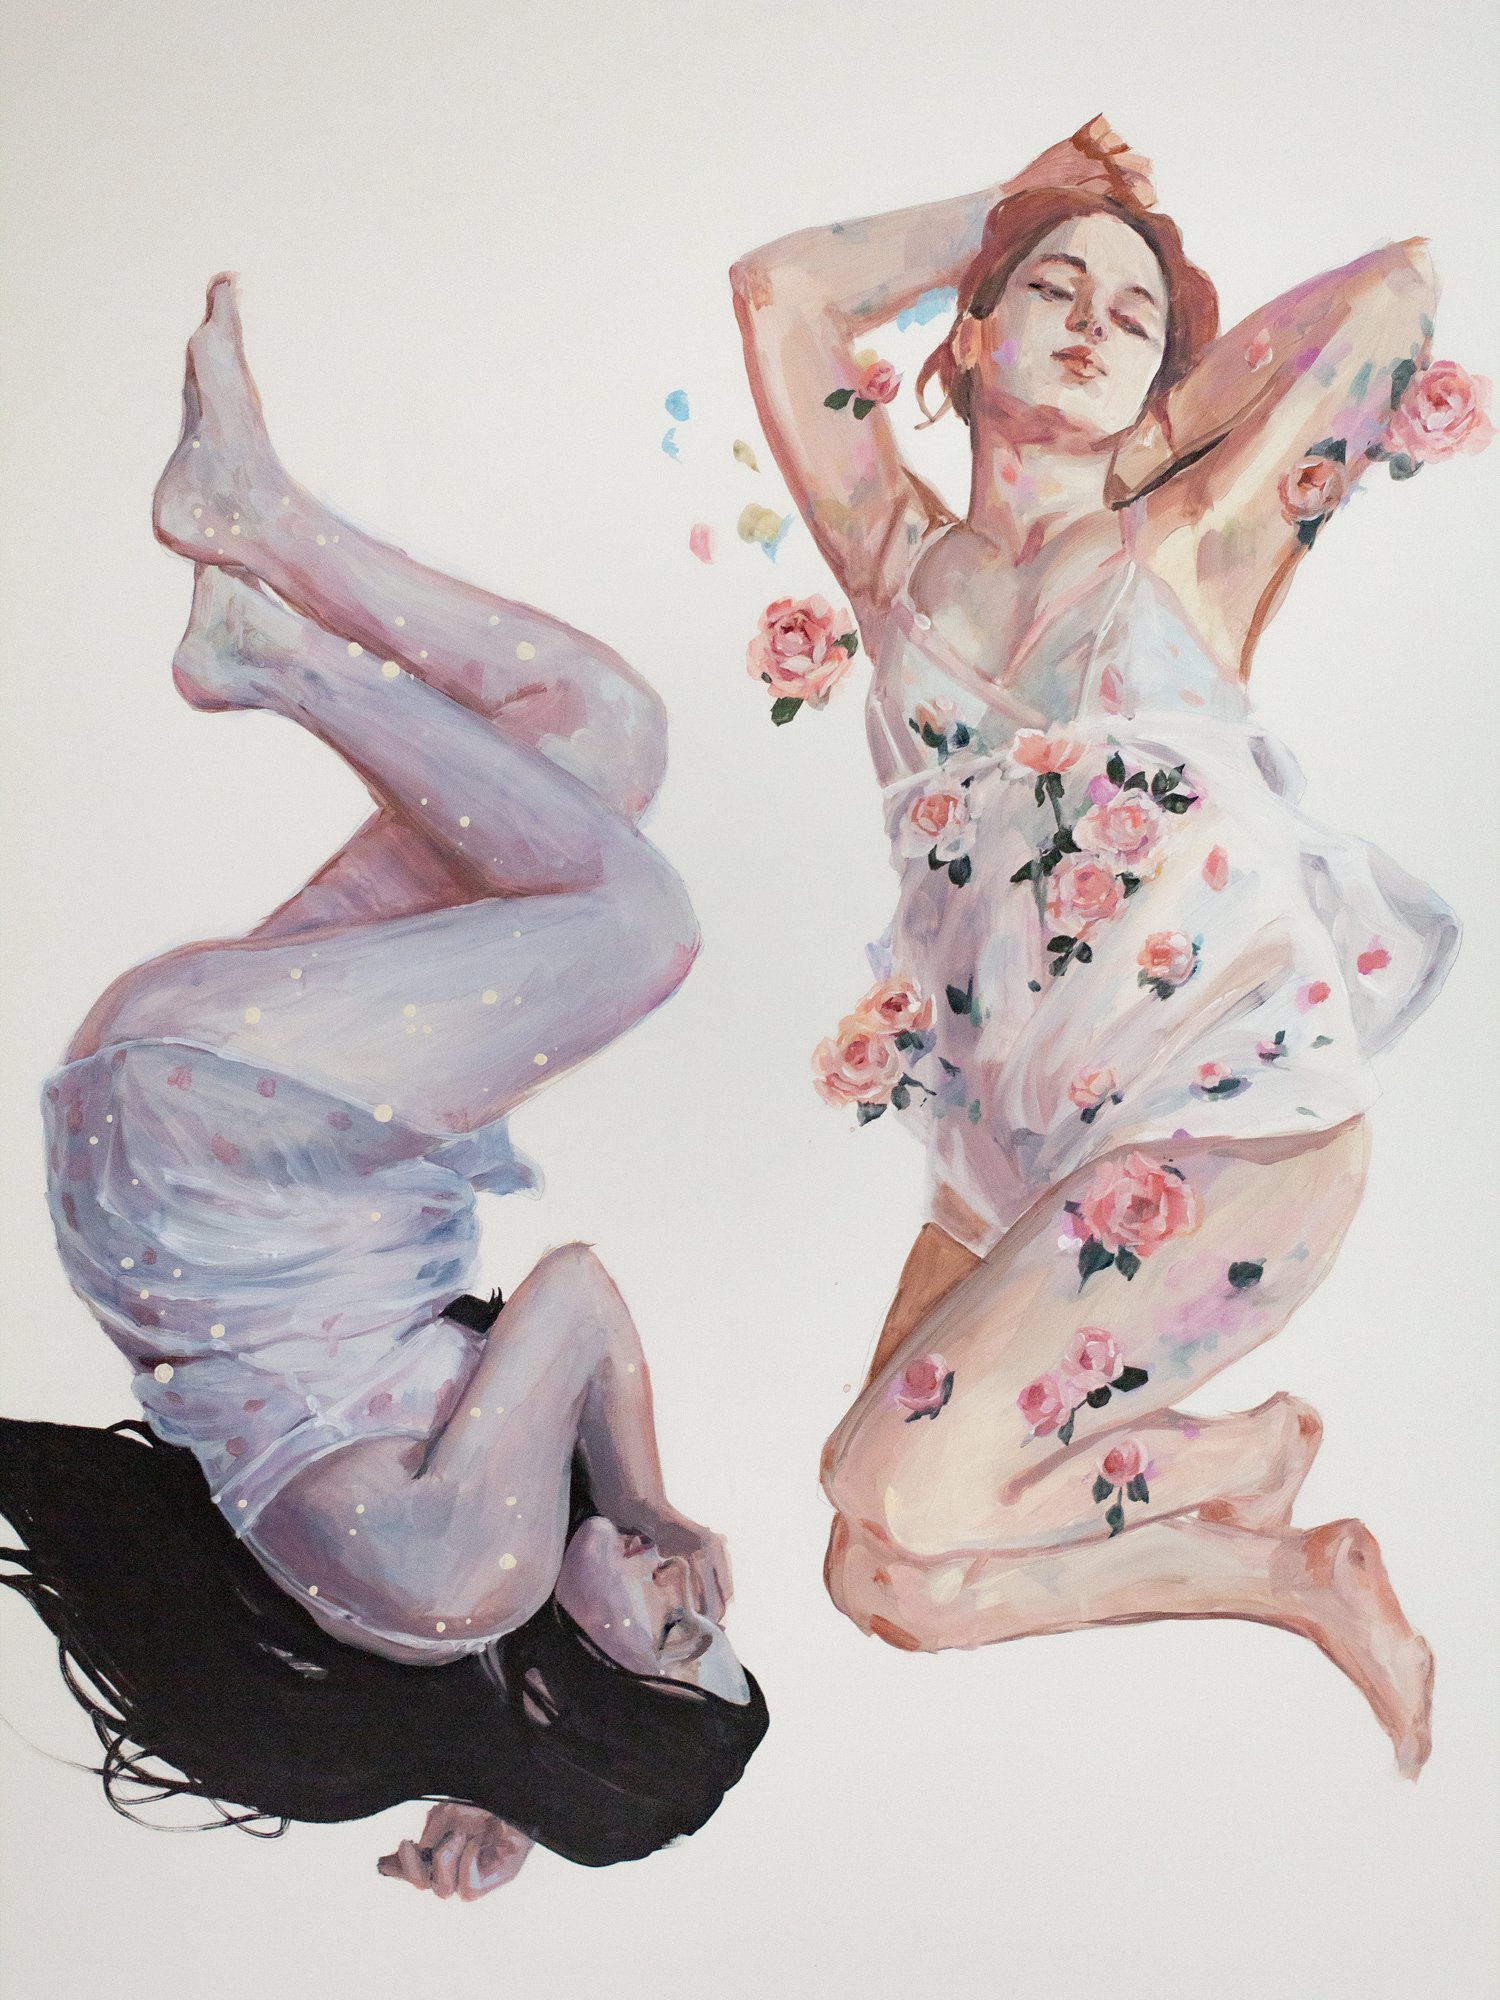 Agnes-Cecile life has been divided in two (80x120 cm)